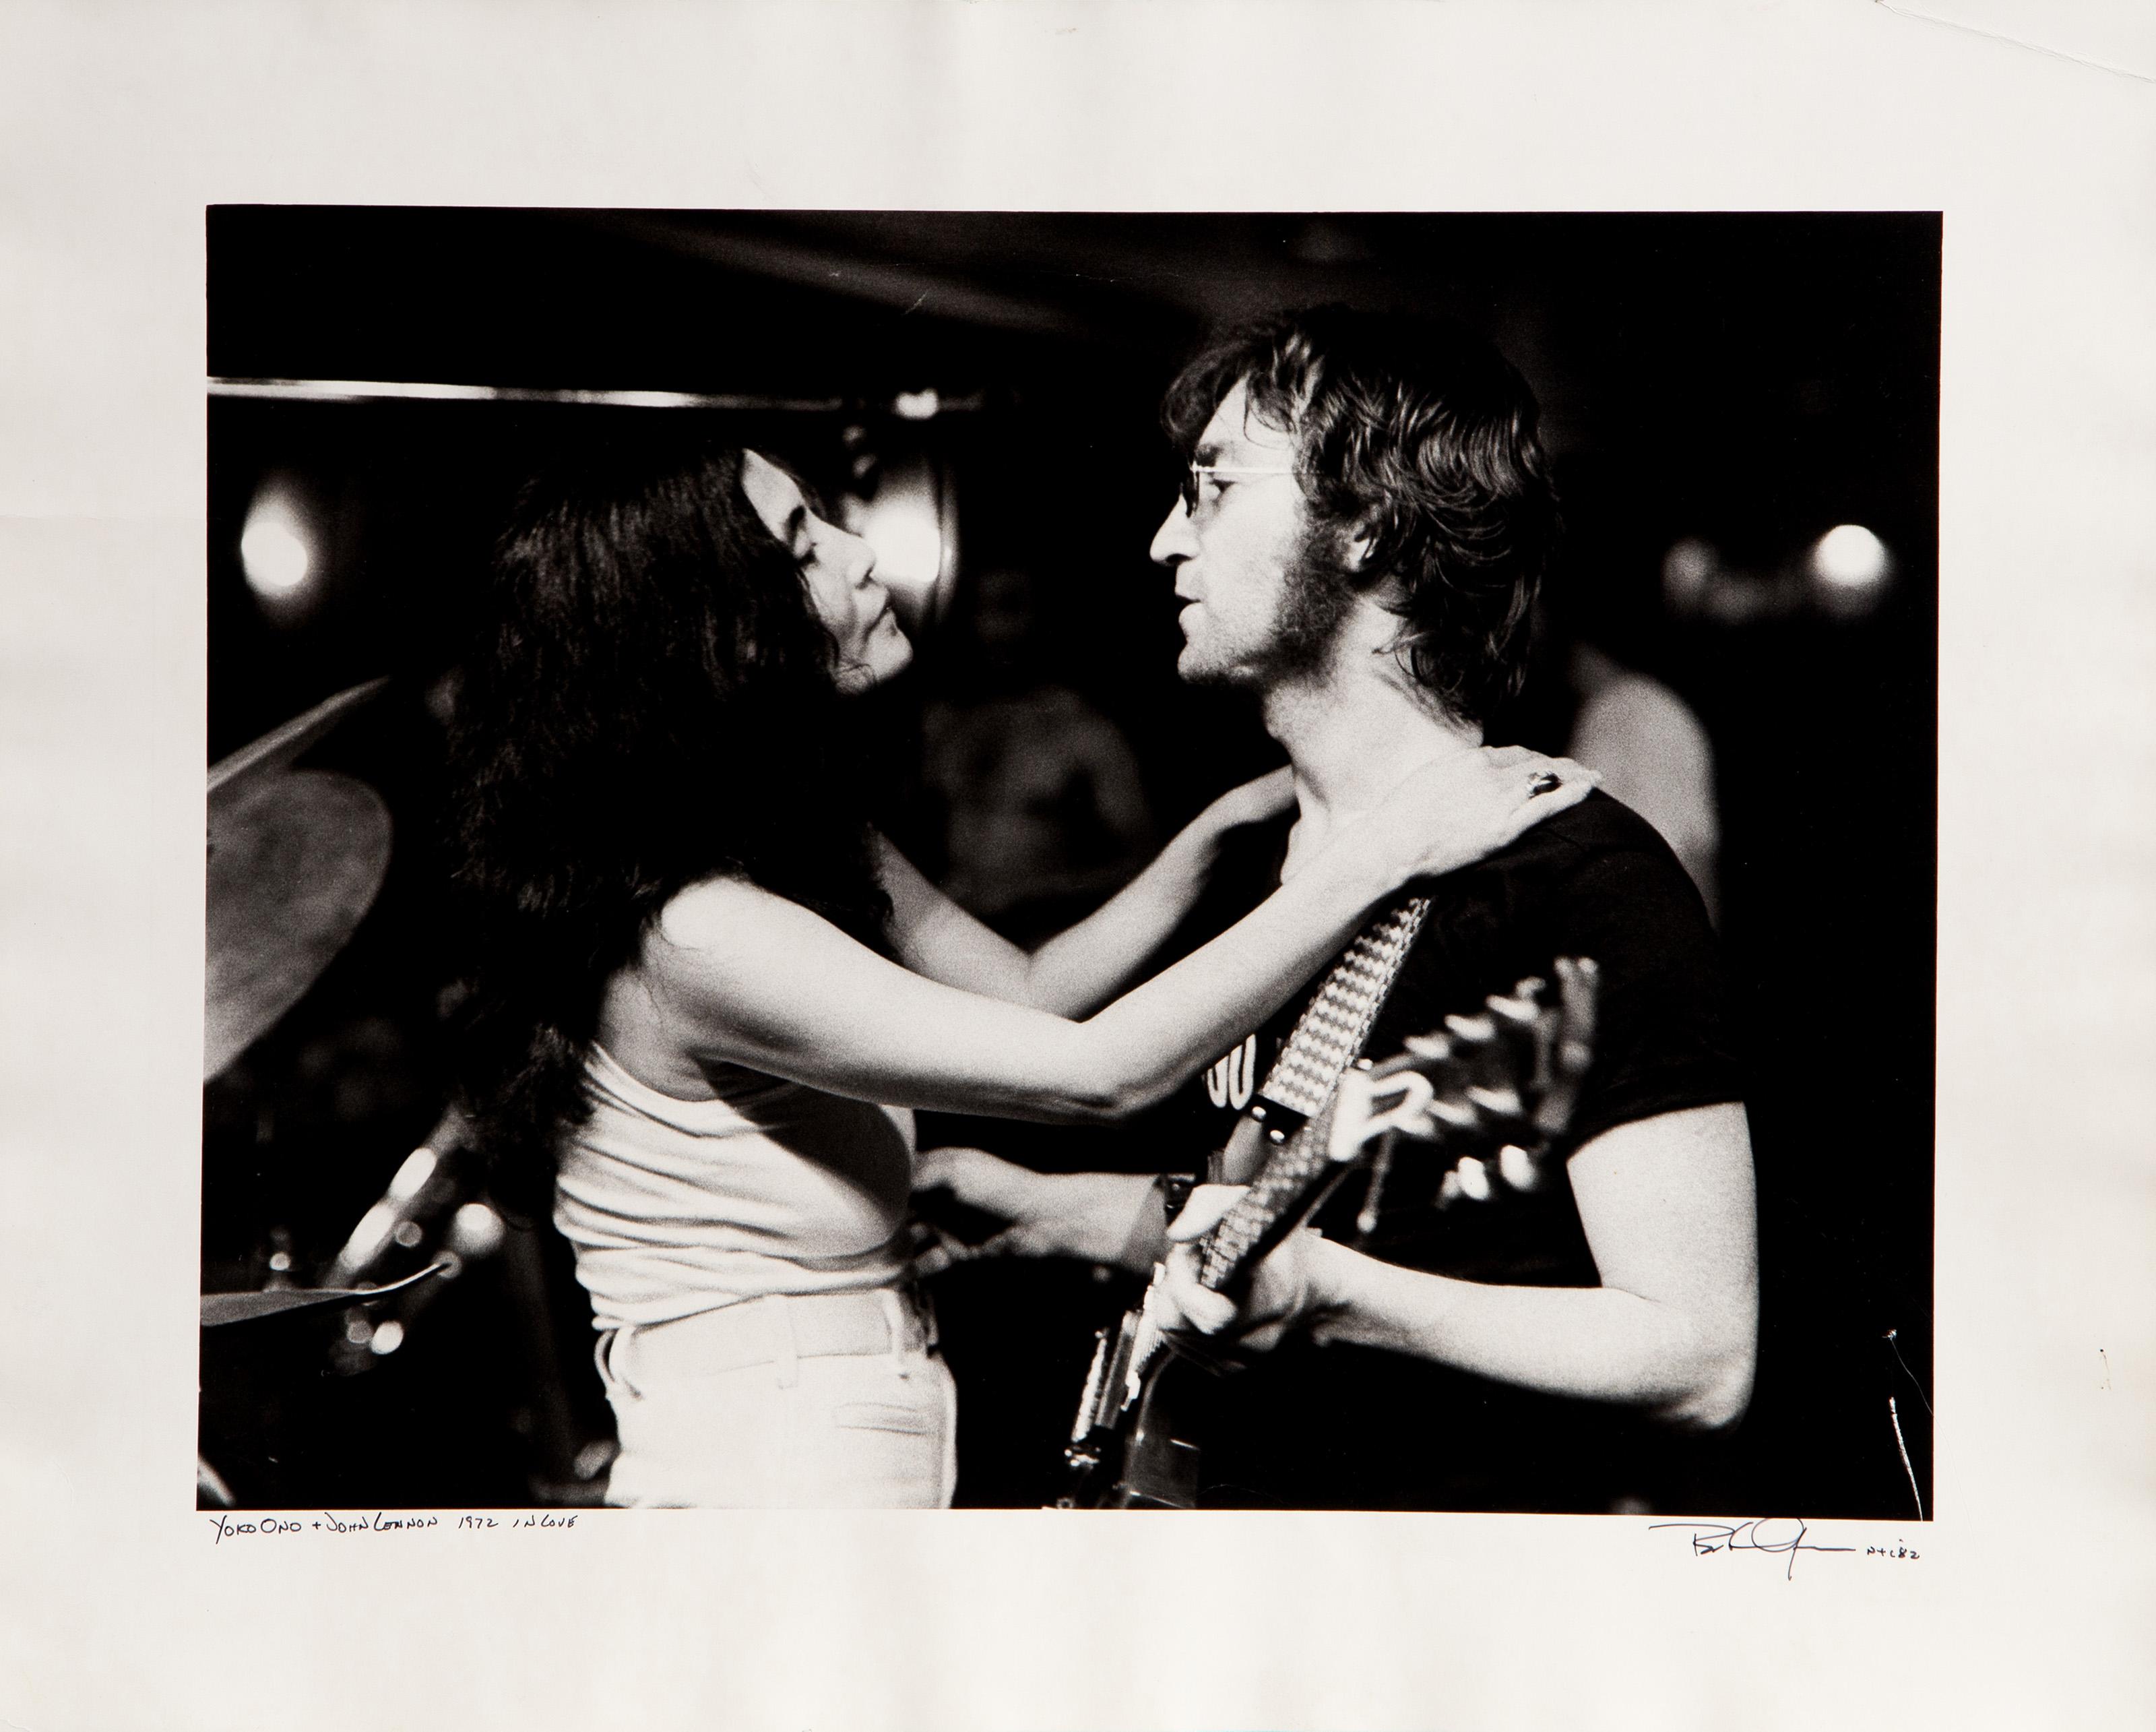 Yoko Ono and John Lennon In Love
Bob Gruen, American (1945)
Date: 1972 (printed 1982)
Gelatin Silver Print Photograph, signed, titled and dated in pen
Image Size: 12 x 16 inches
Size: 16 x 20 in. (40.64 x 50.8 cm)